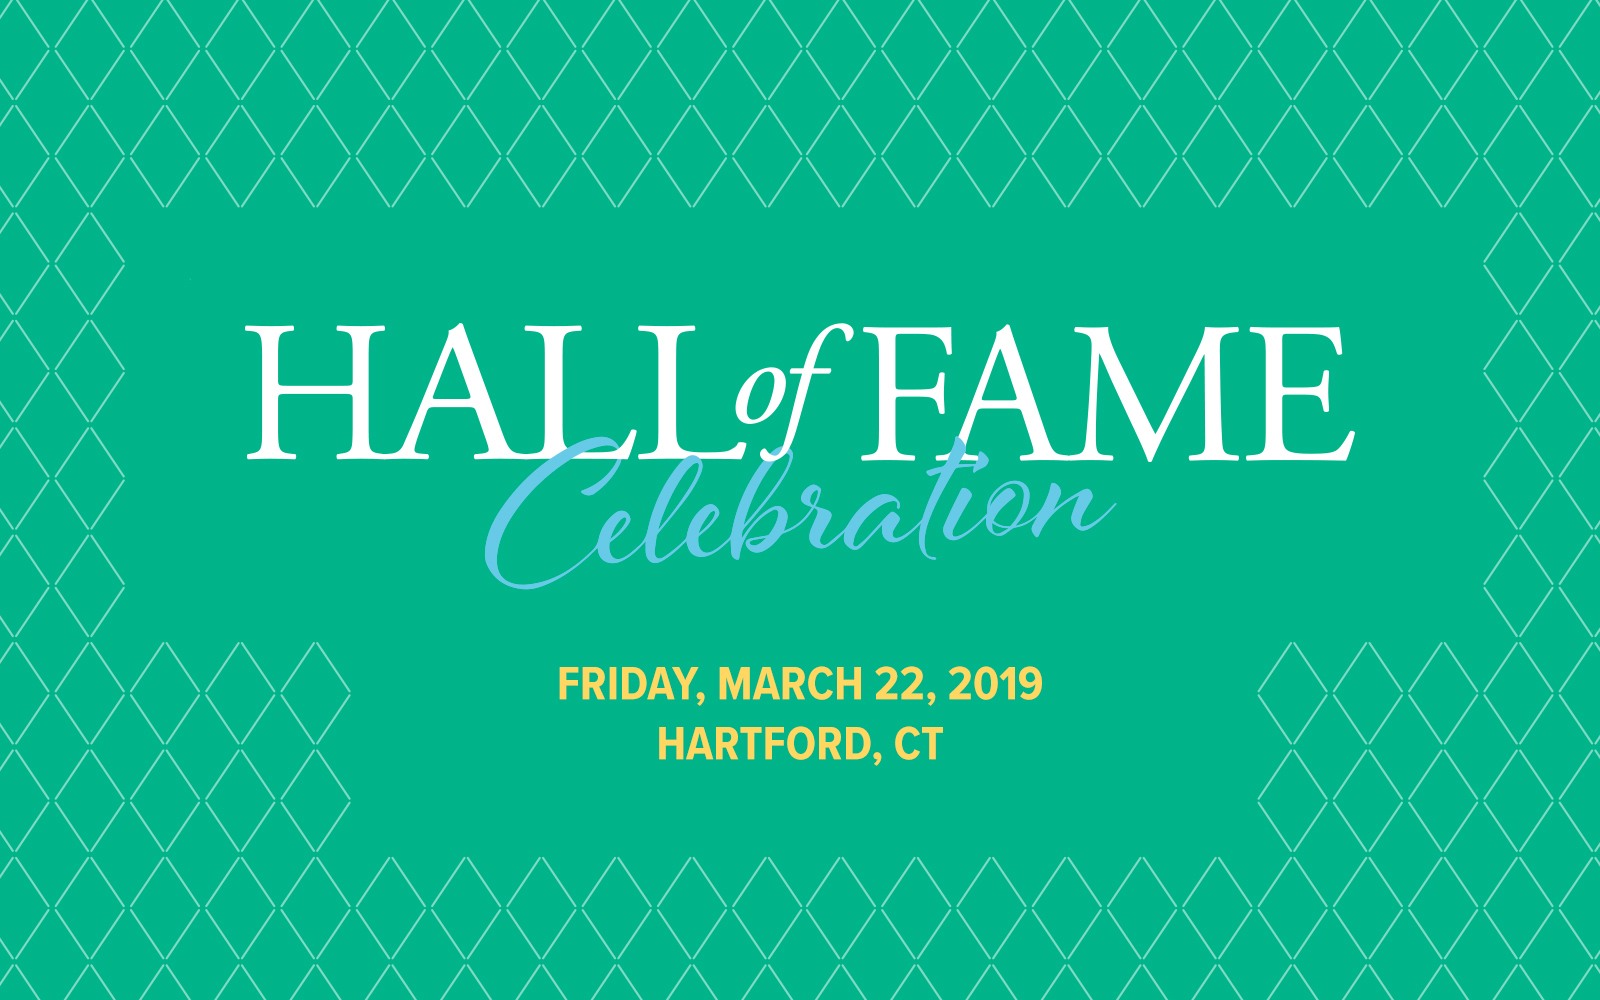 UConn School of Business Hall of Fame Celebration Friday, March 22, 2019 Hartford Connecticut